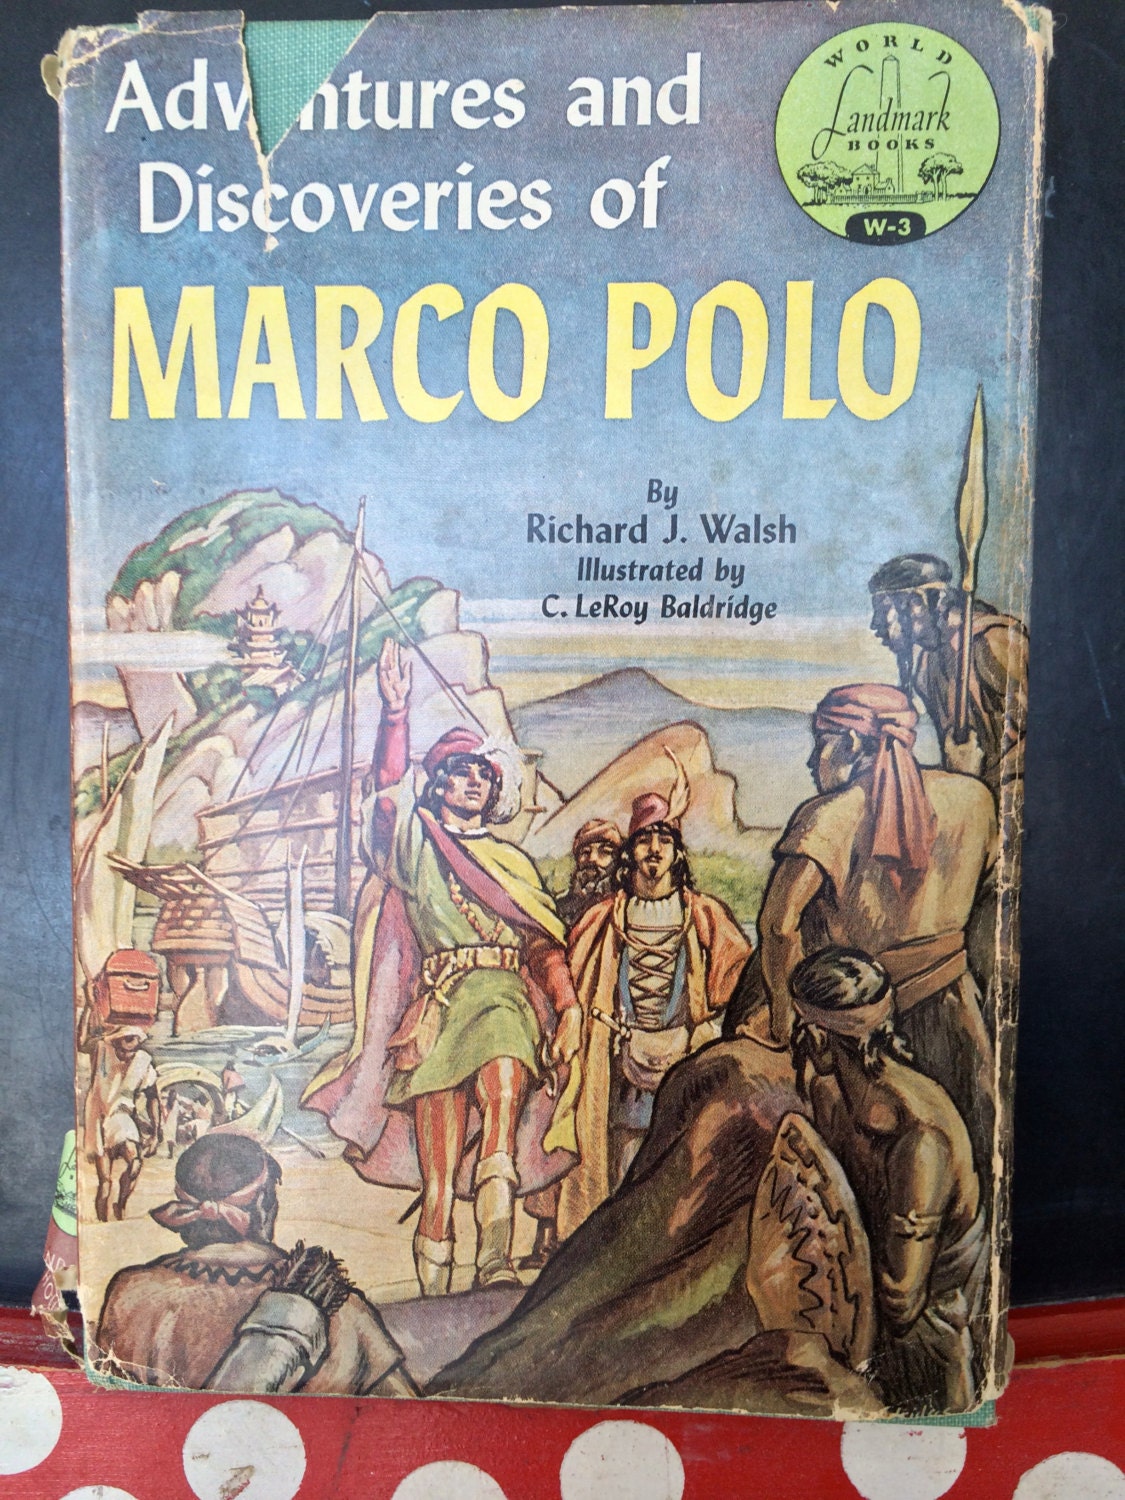 the adventures of marco polo